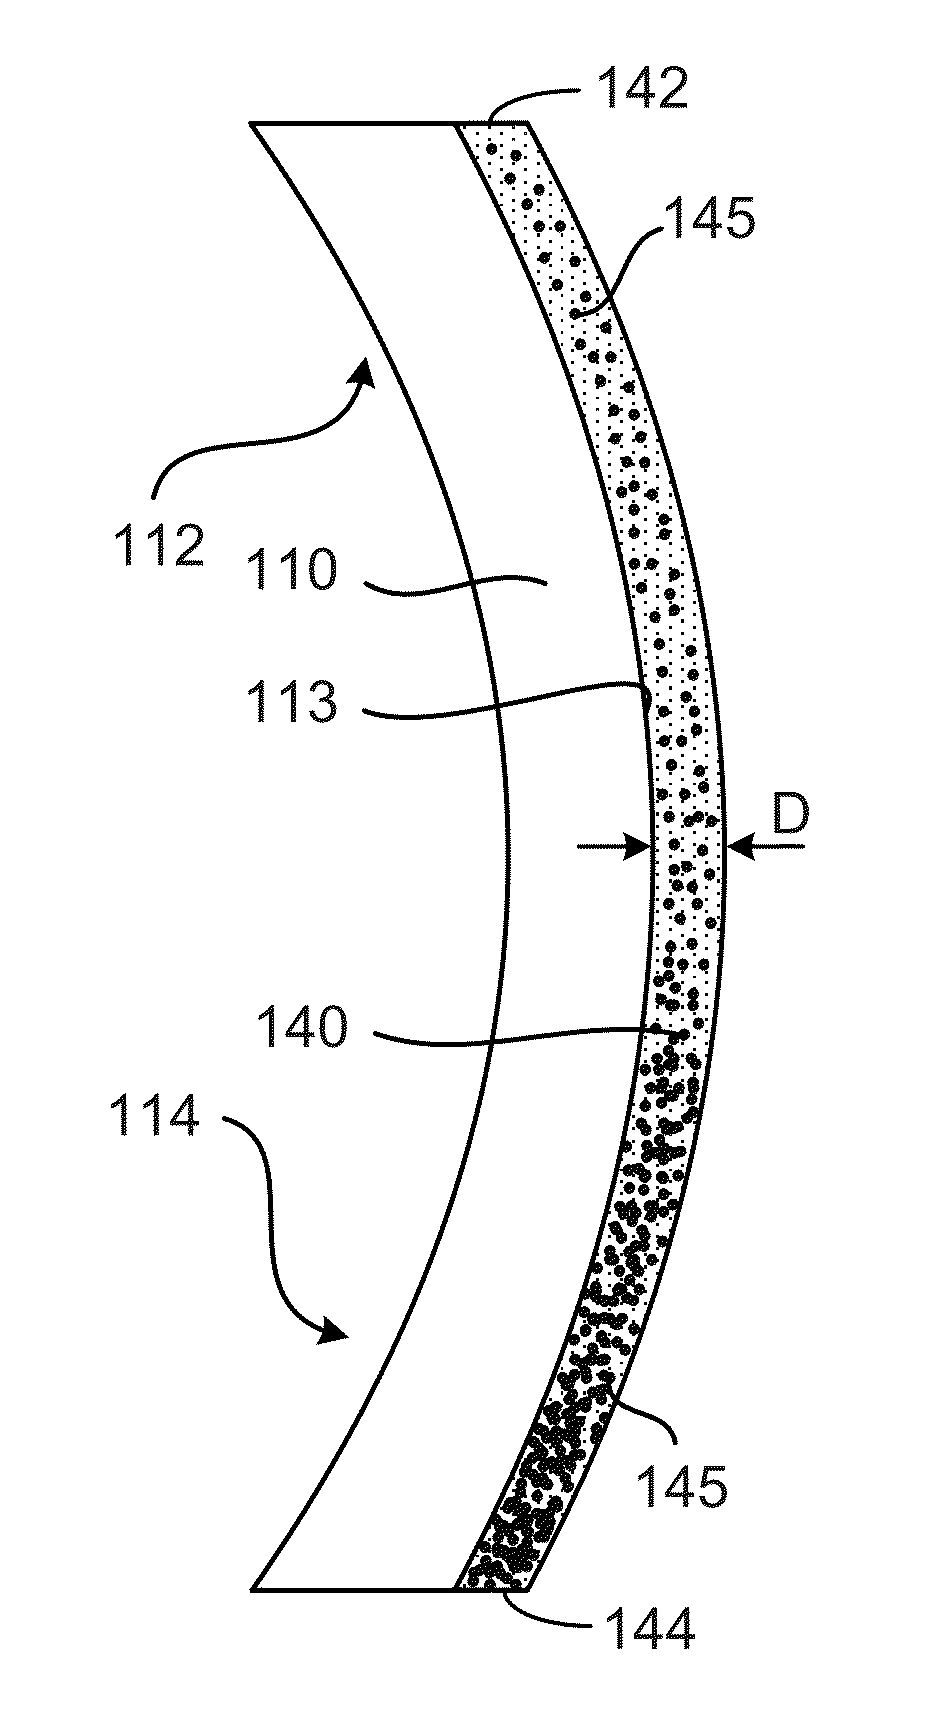 Lenses with graded photochromic, molds and methods of making same